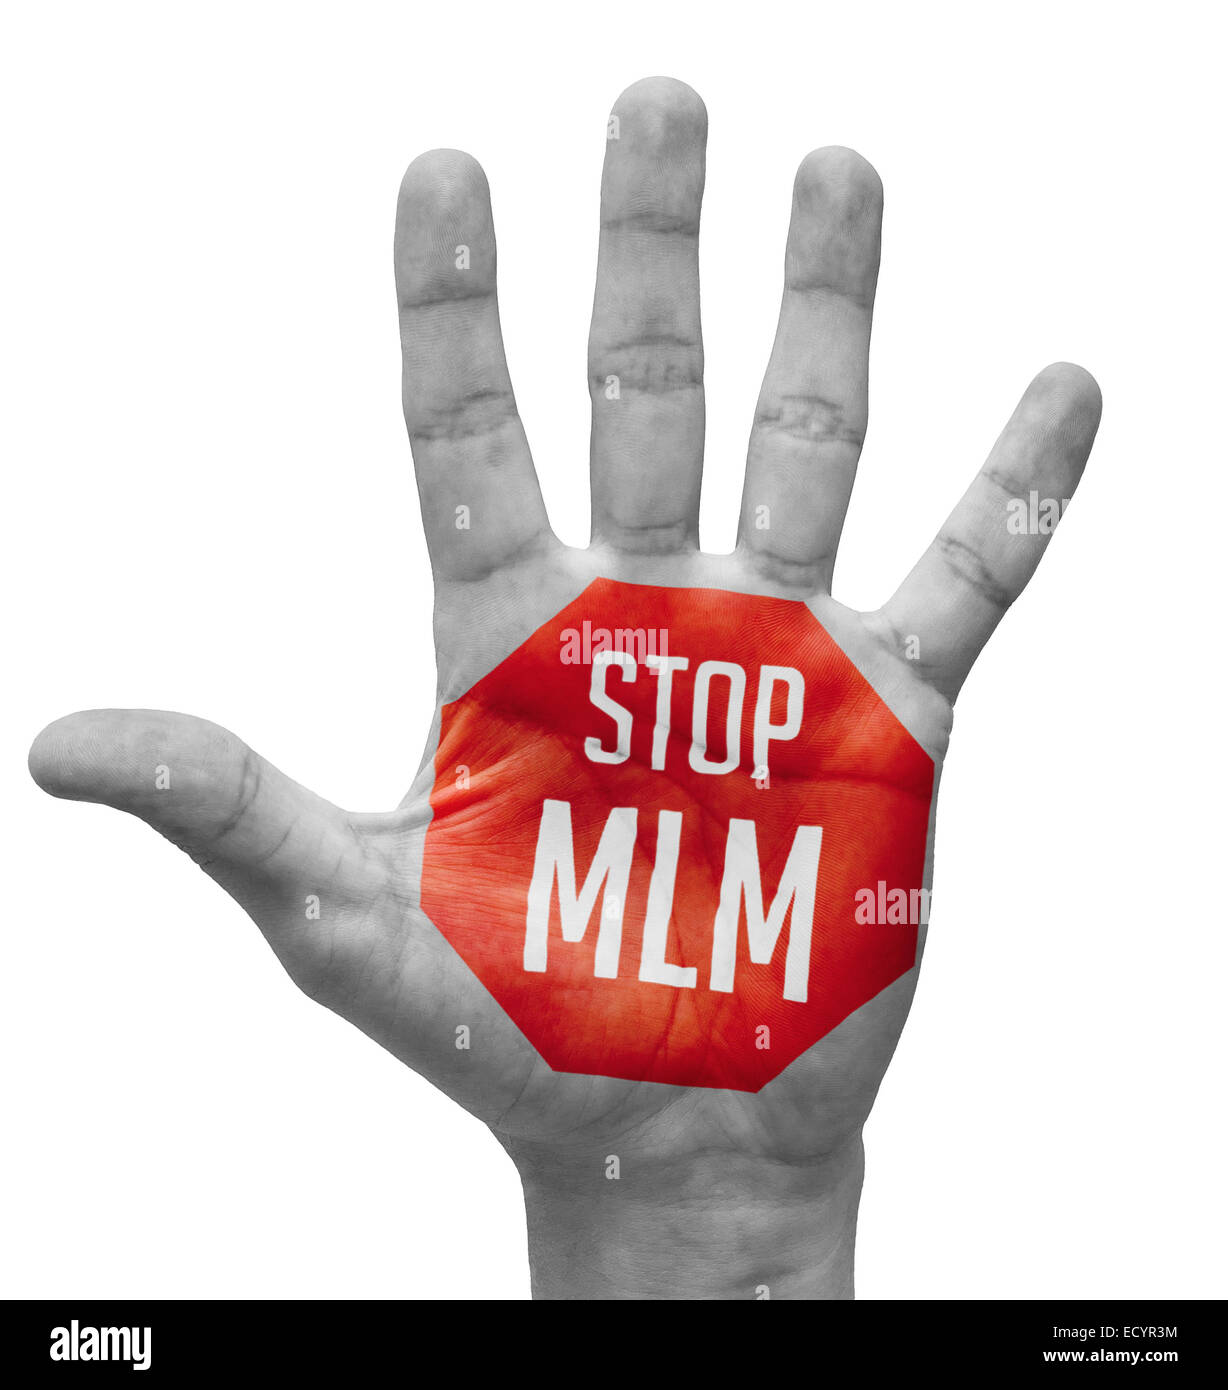 Stop MLM on Open Hand. Stock Photo